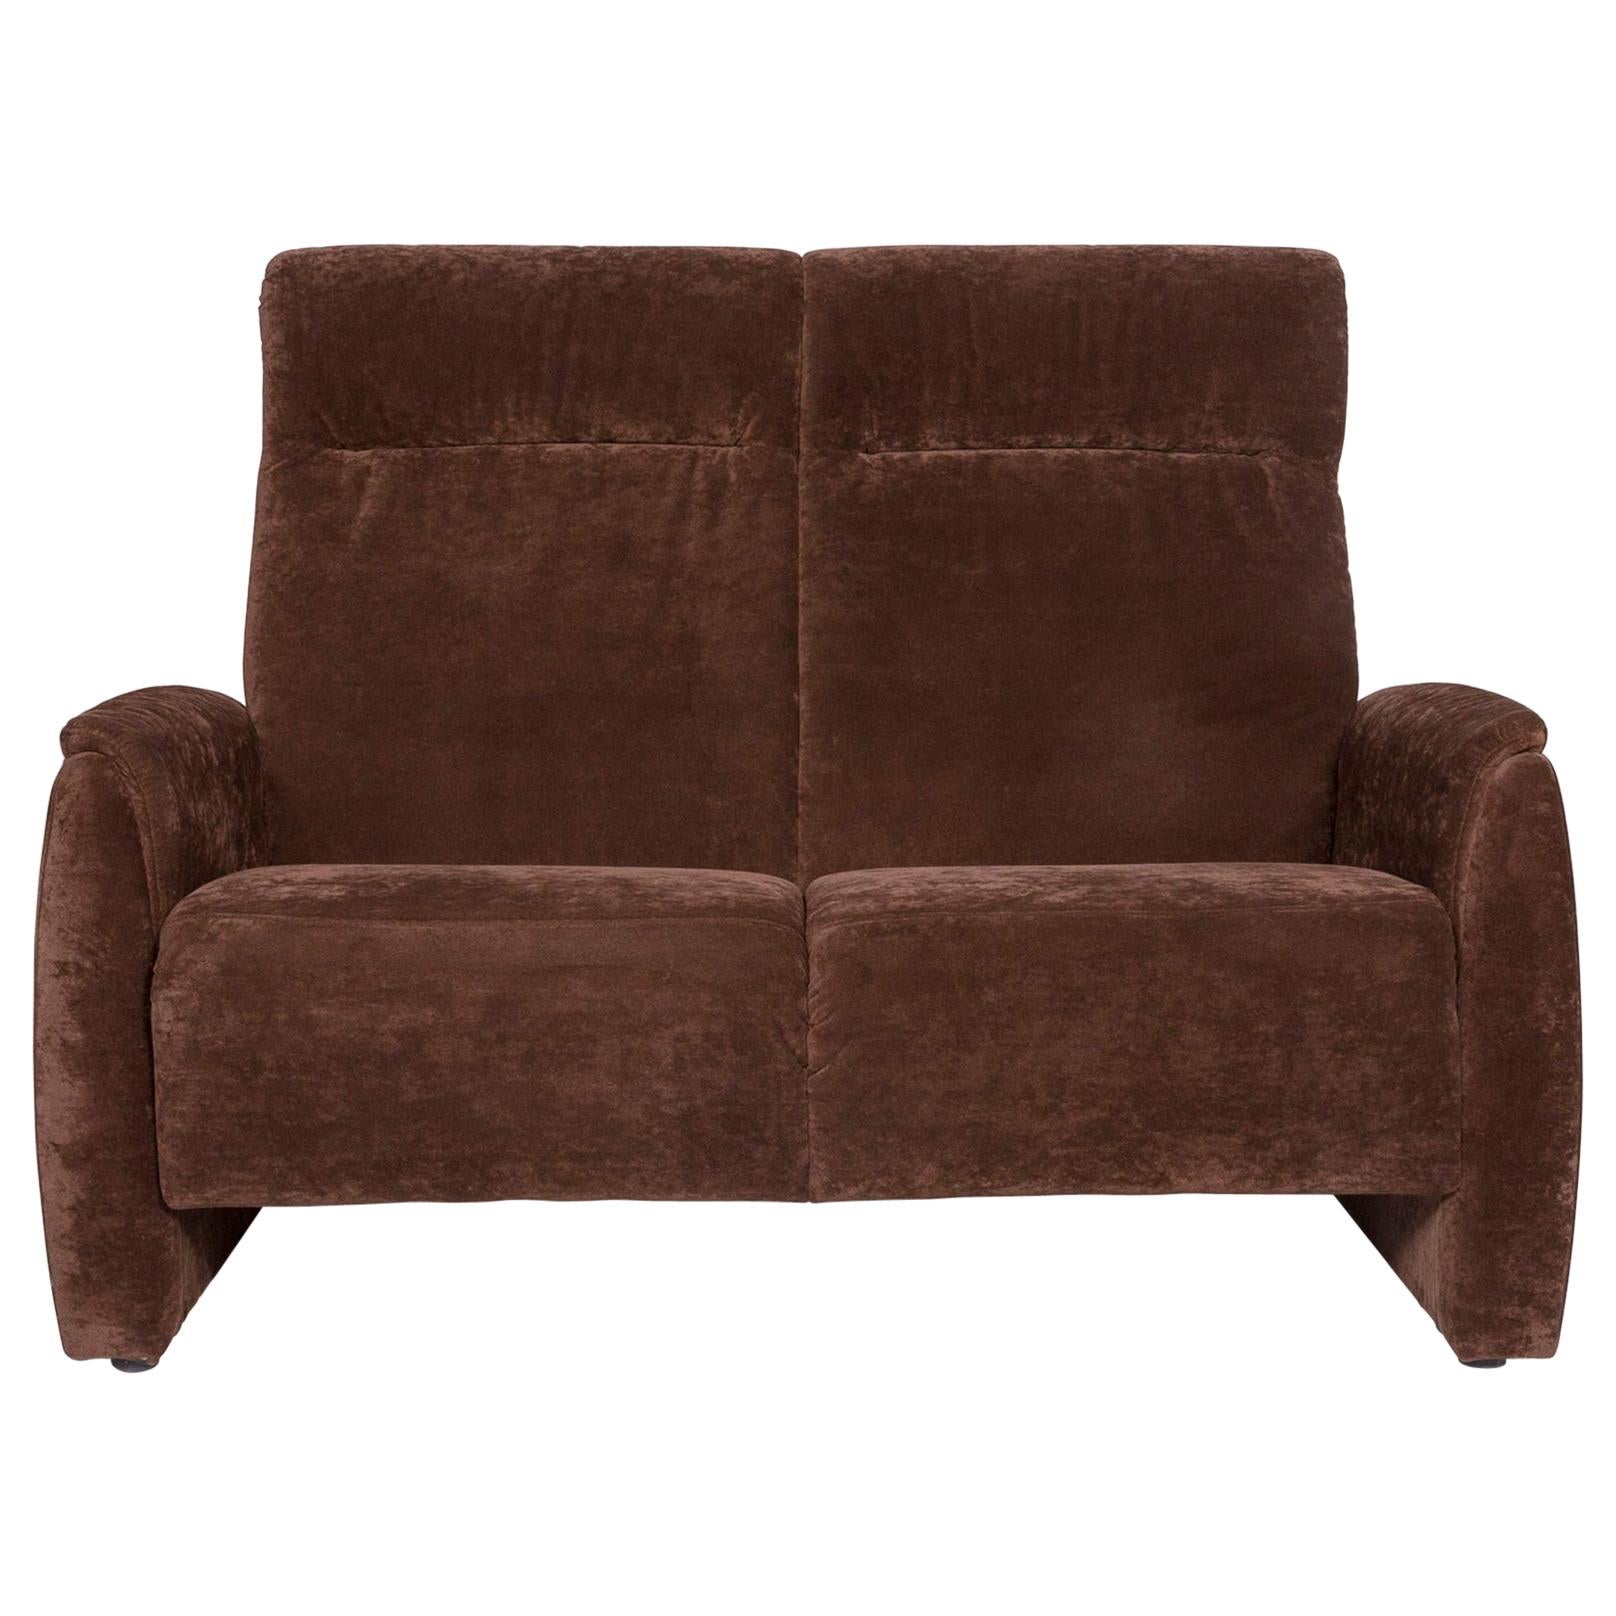 Himolla Fabric Sofa Brown Two-Seat Couch For Sale